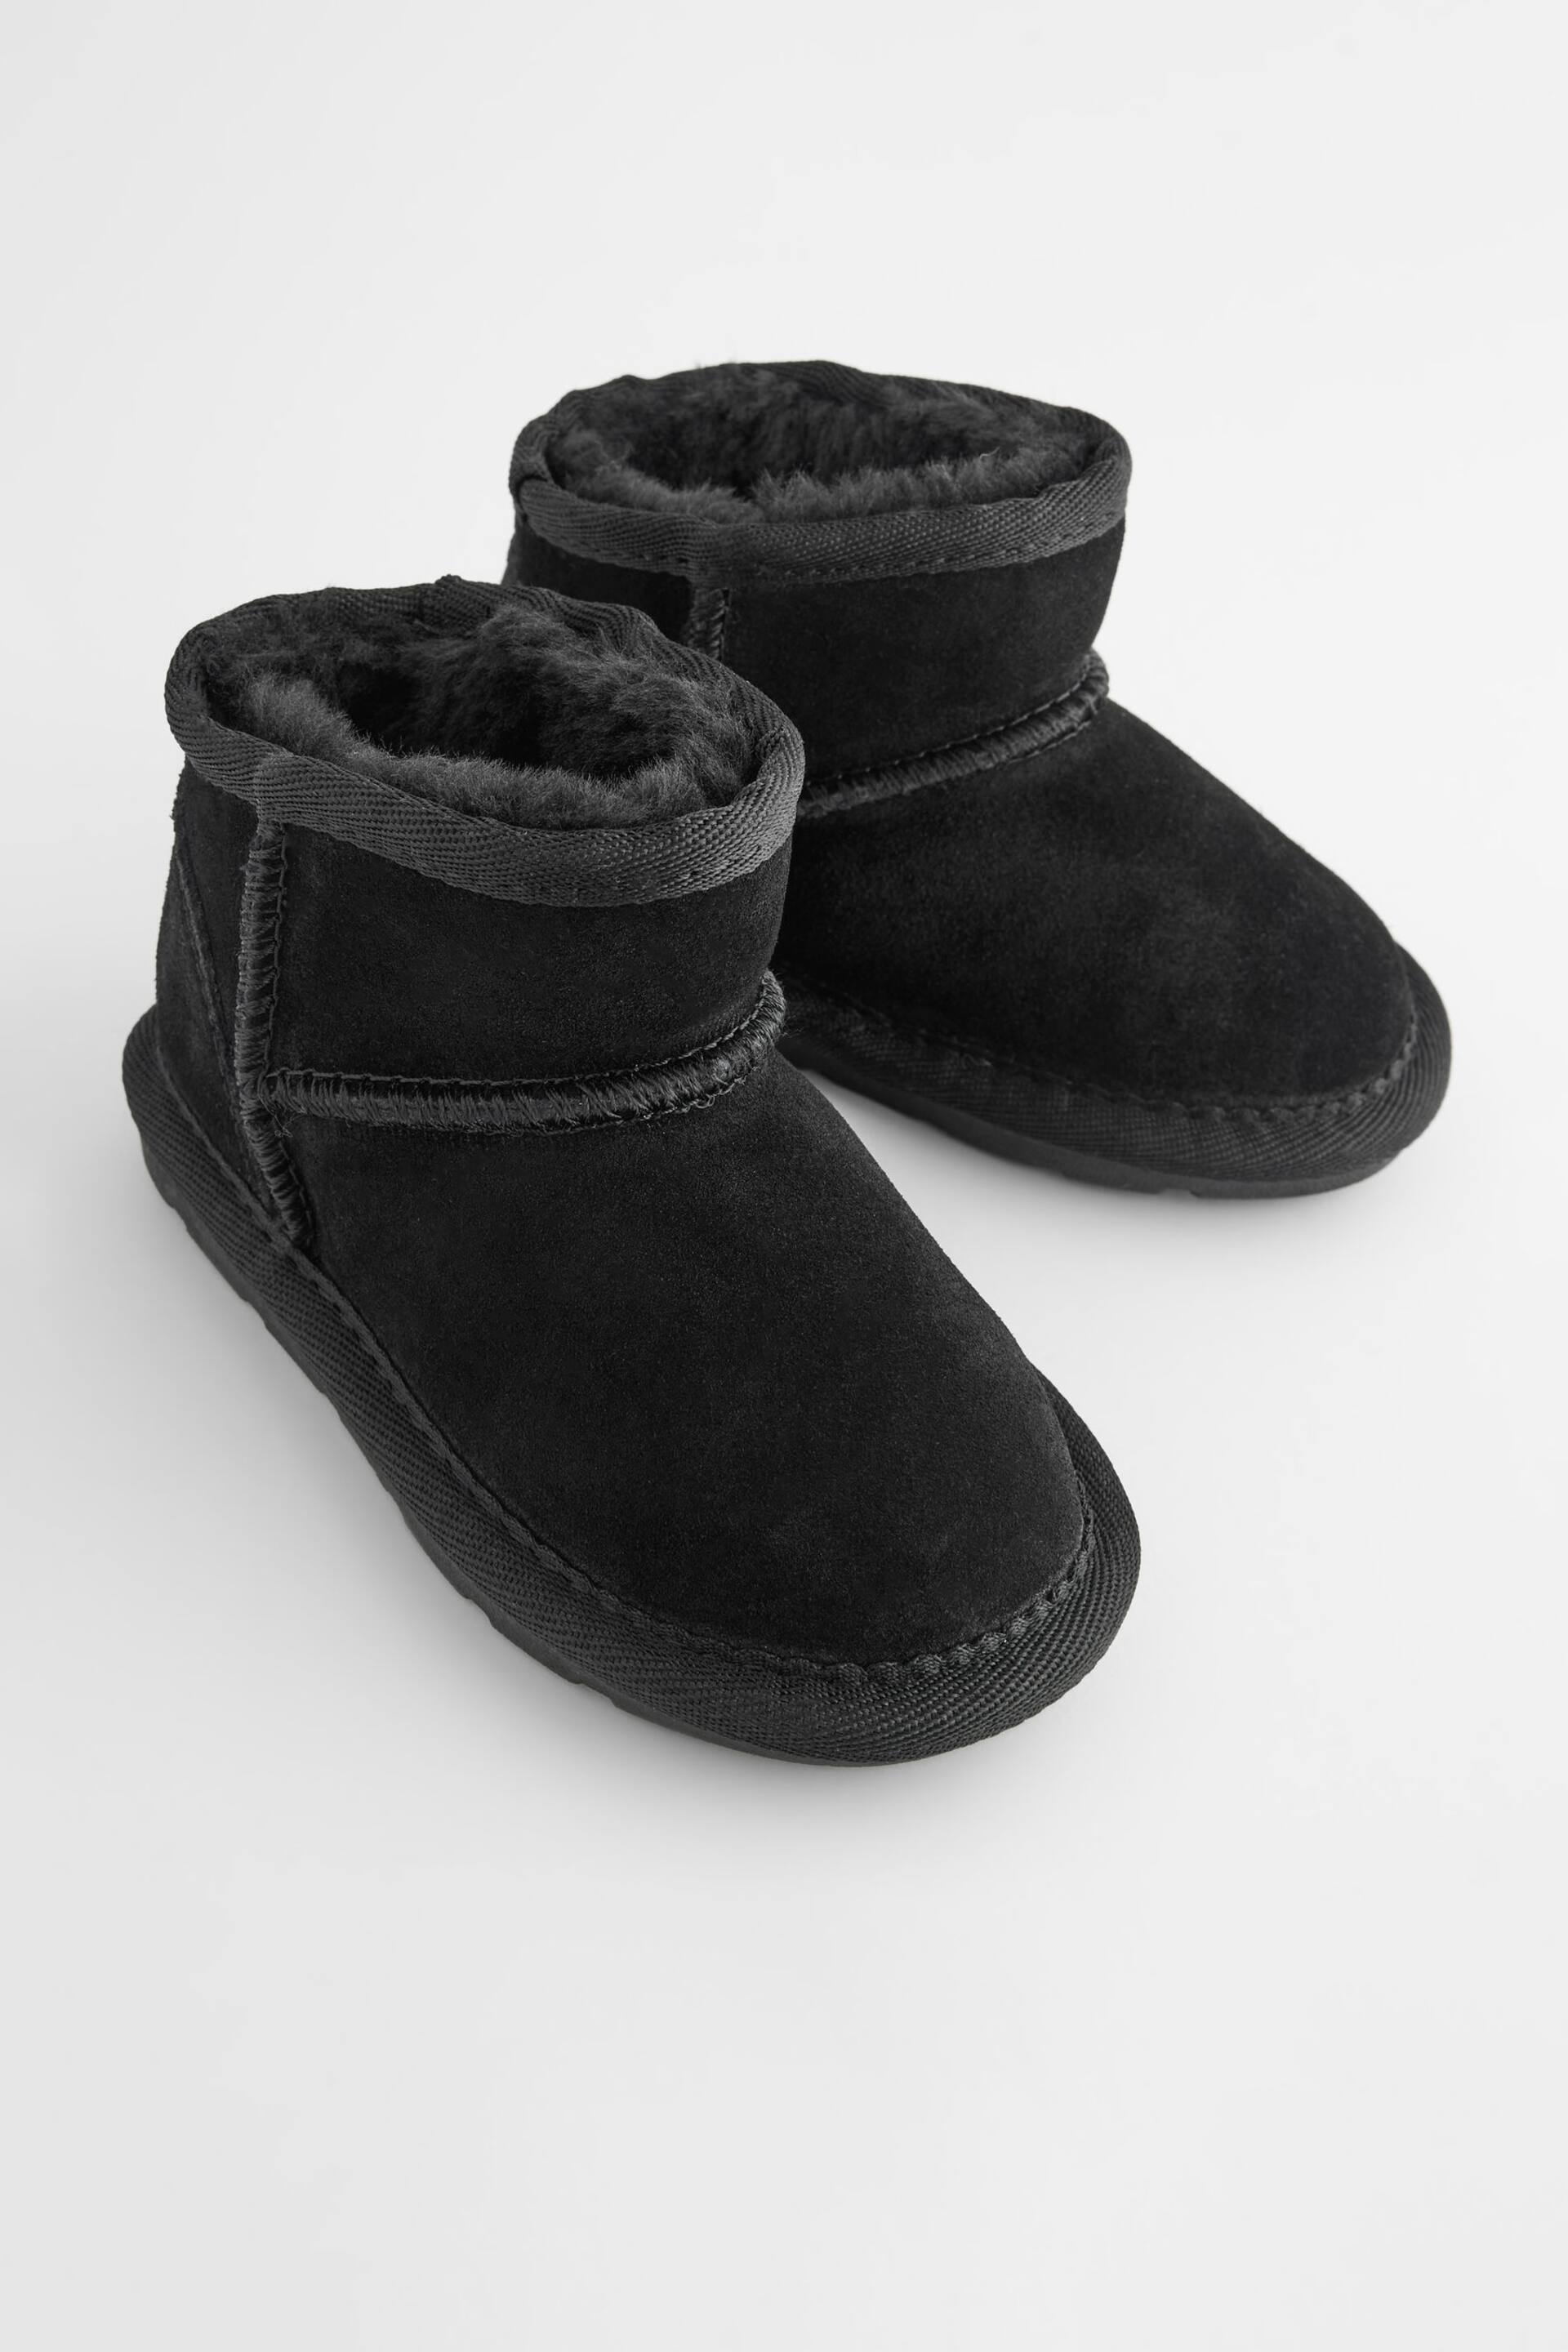 Black Suede Mini Faux Fur Lined Water Repellent Pull-On Suede Boots - Image 6 of 9